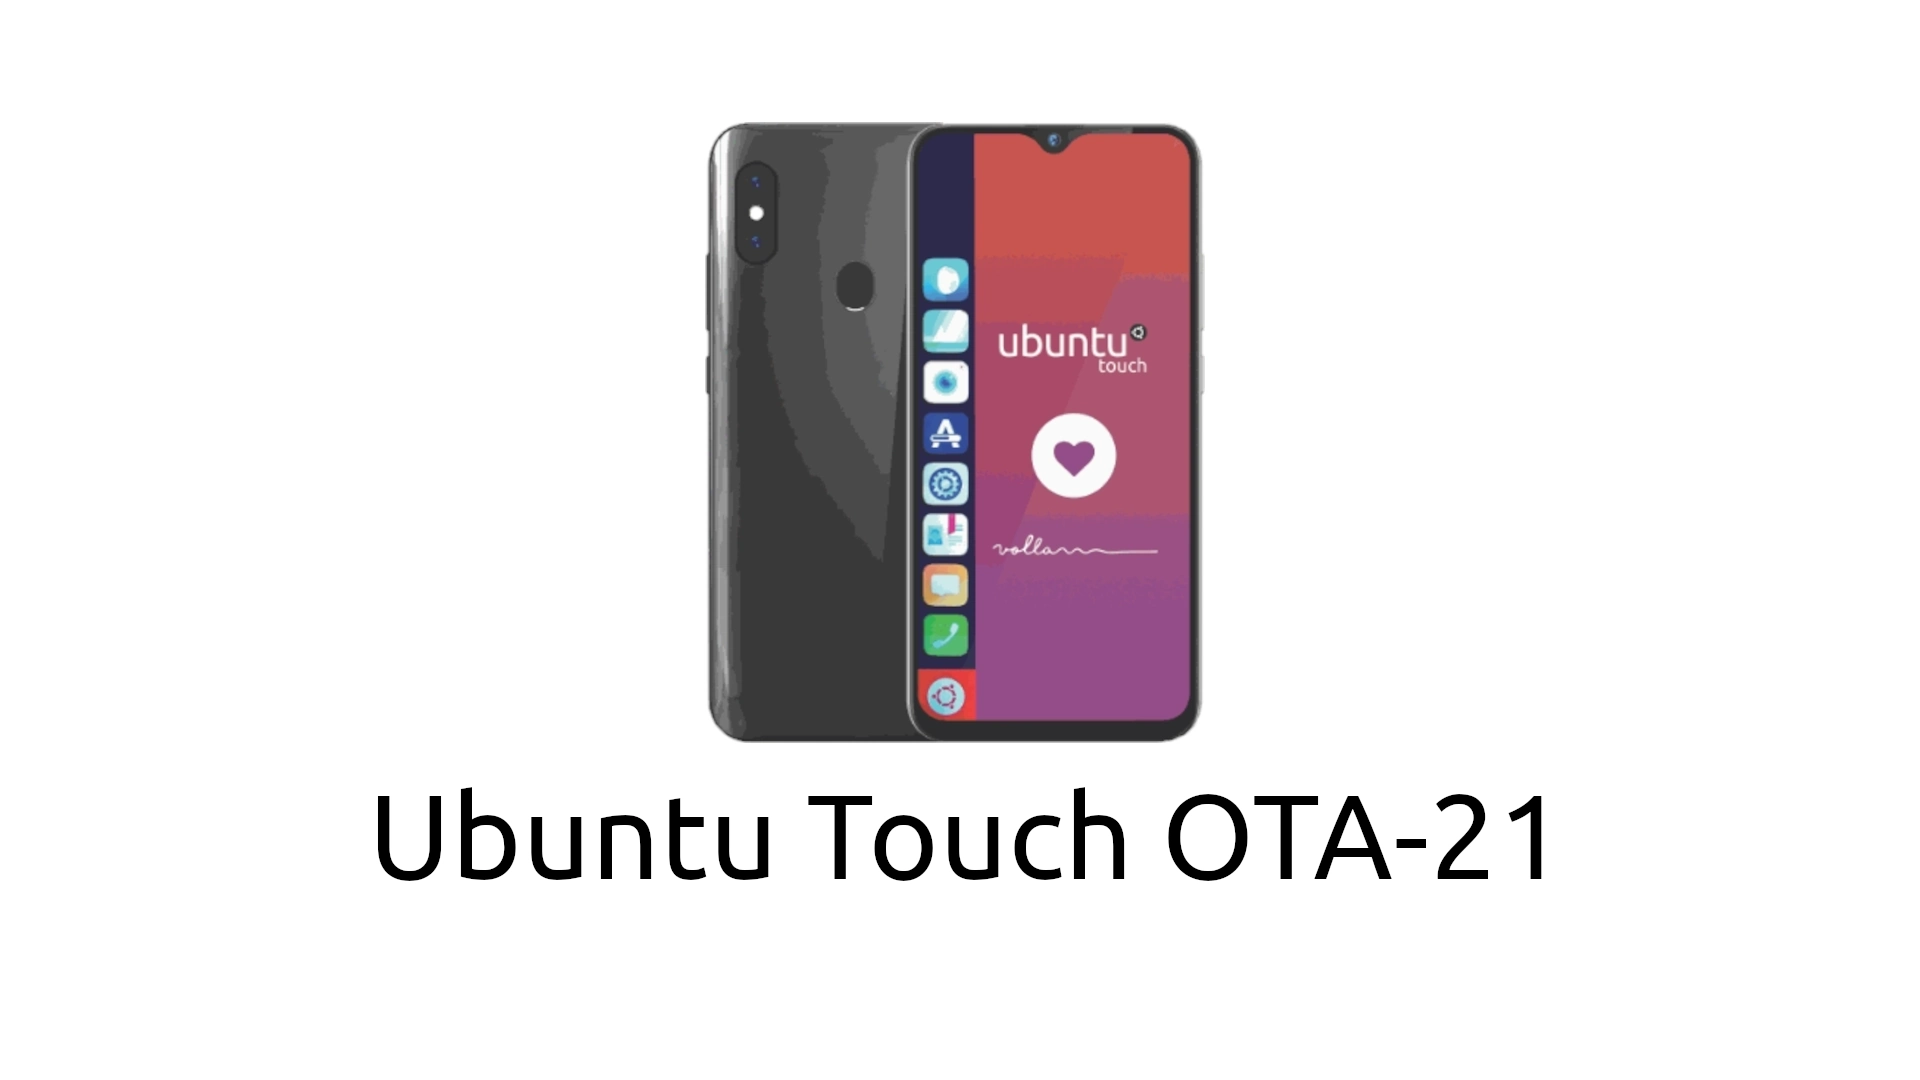 Ubuntu Touch OTA-21 Arrives on January 5th, 2022, with Redesigned Greeter, More Fixes